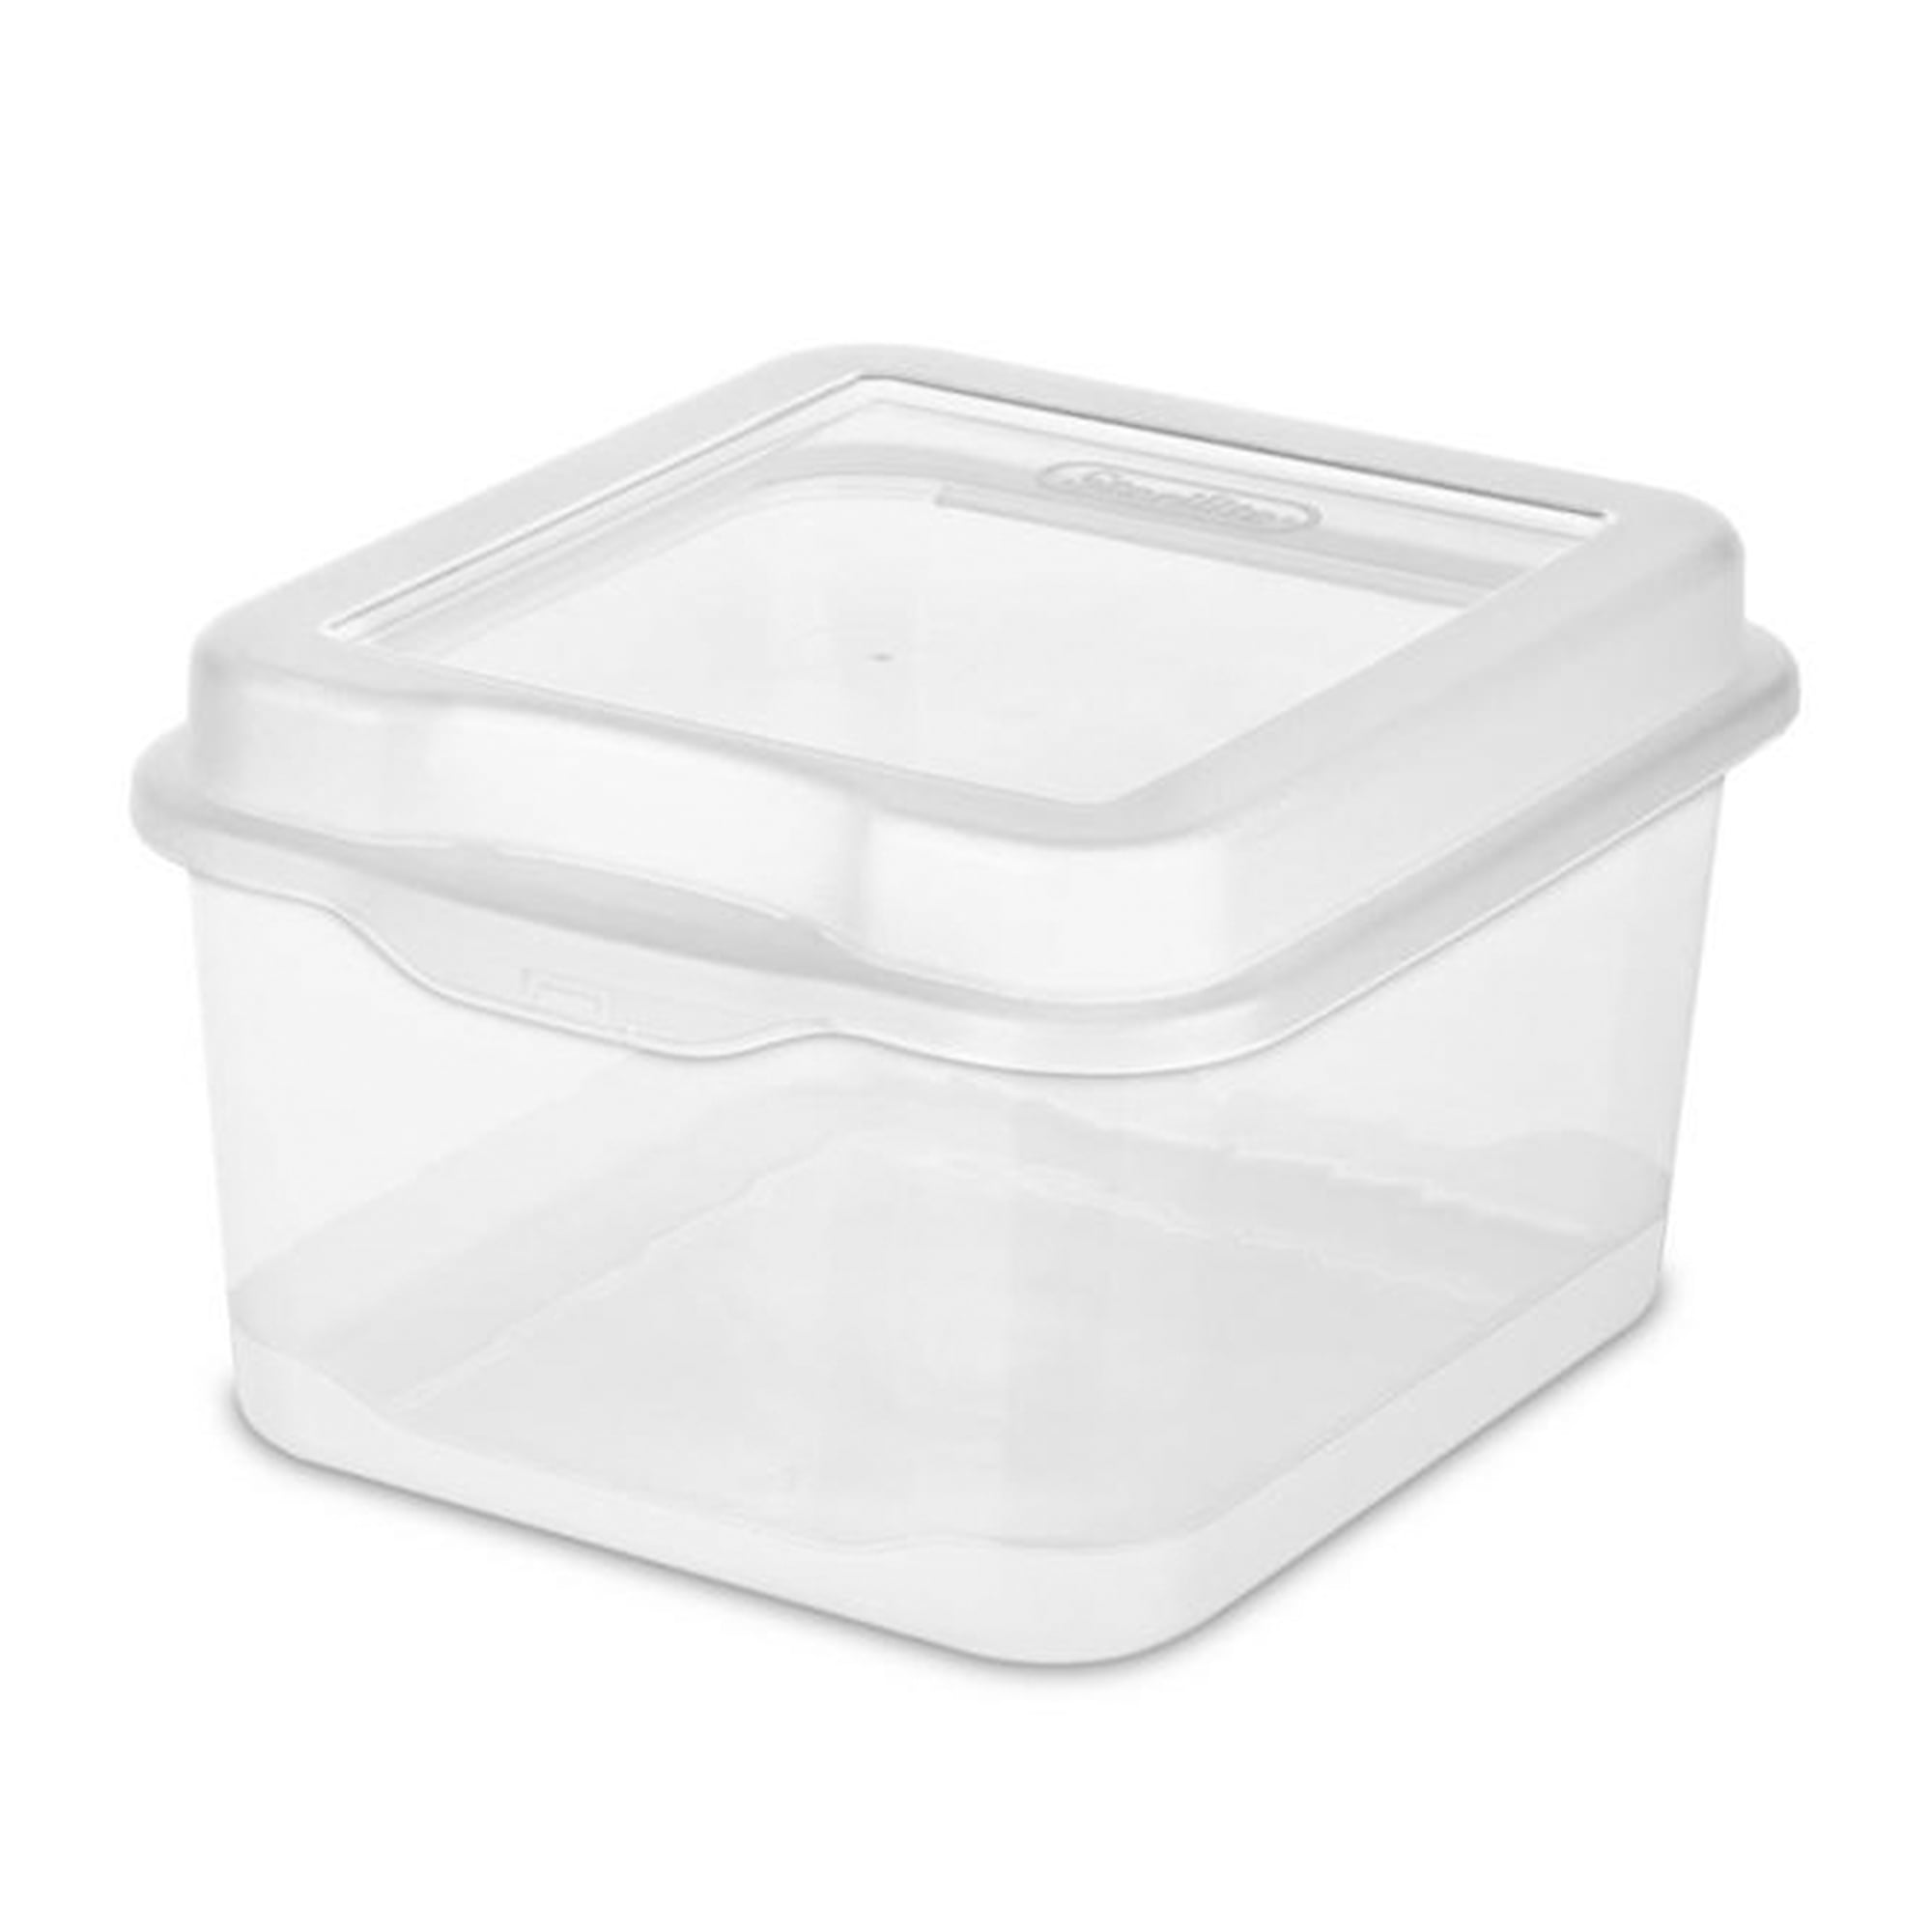 Freezer Storage Containers by The Case - 1-1/2 Pint (Case of 48)